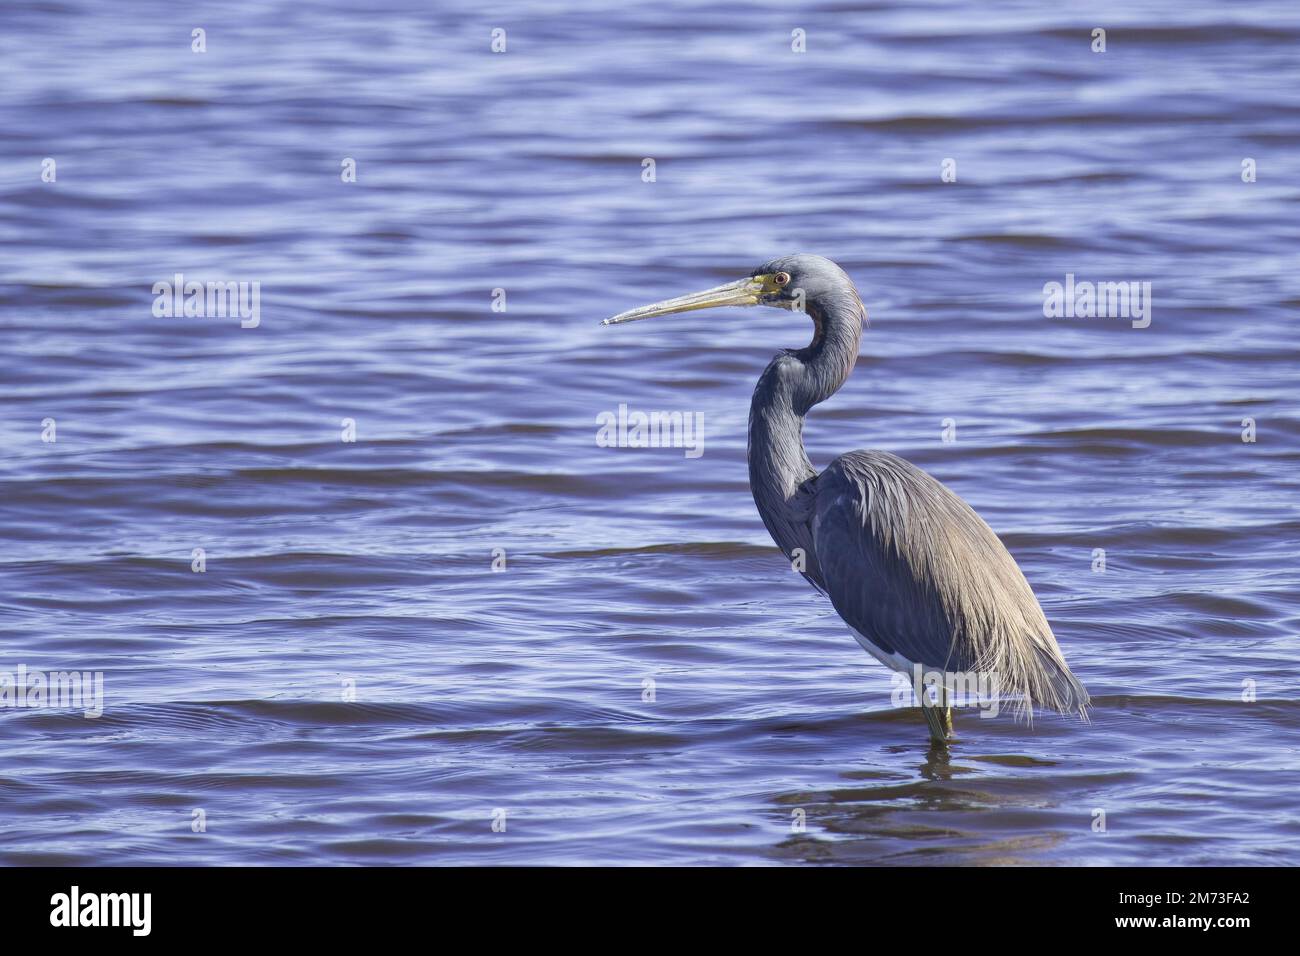 Tricolored Heron in side profile stands in clear blue water of a Florida lake showing blue grey mauve feathers plumage long curved neck and beak bill Stock Photo